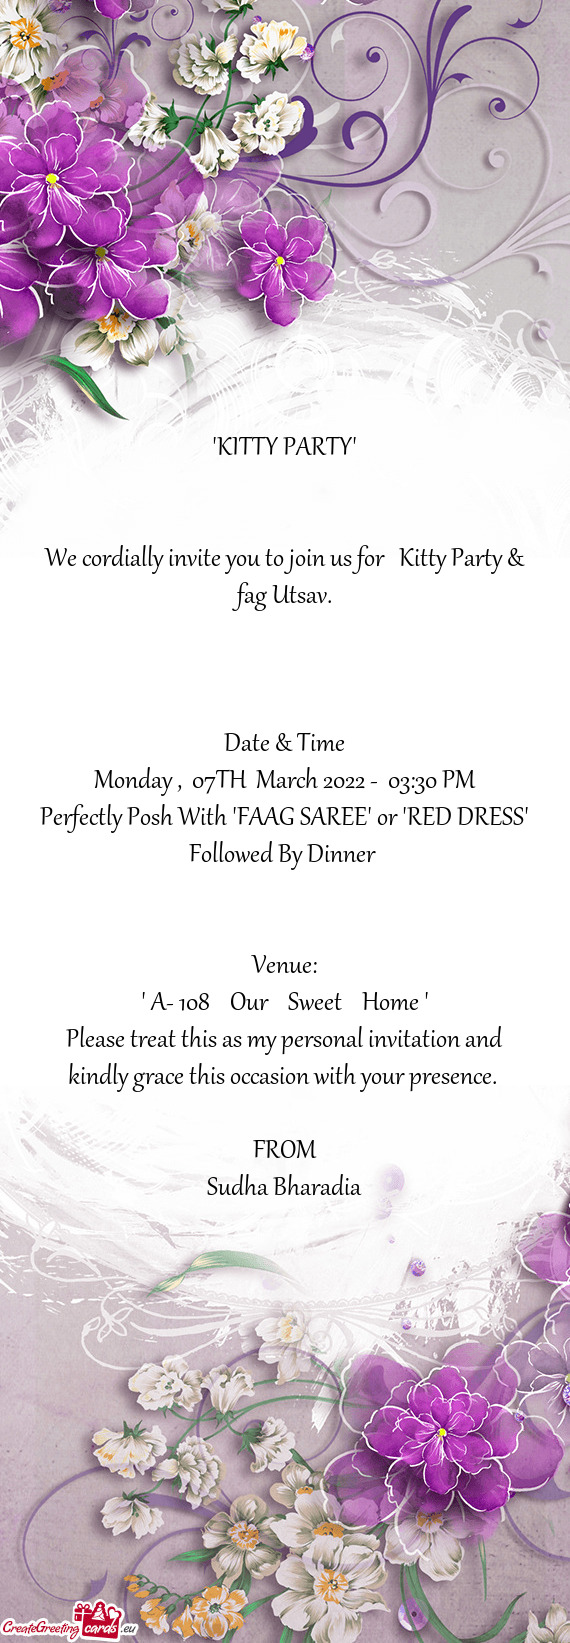 We cordially invite you to join us for Kitty Party & fag Utsav